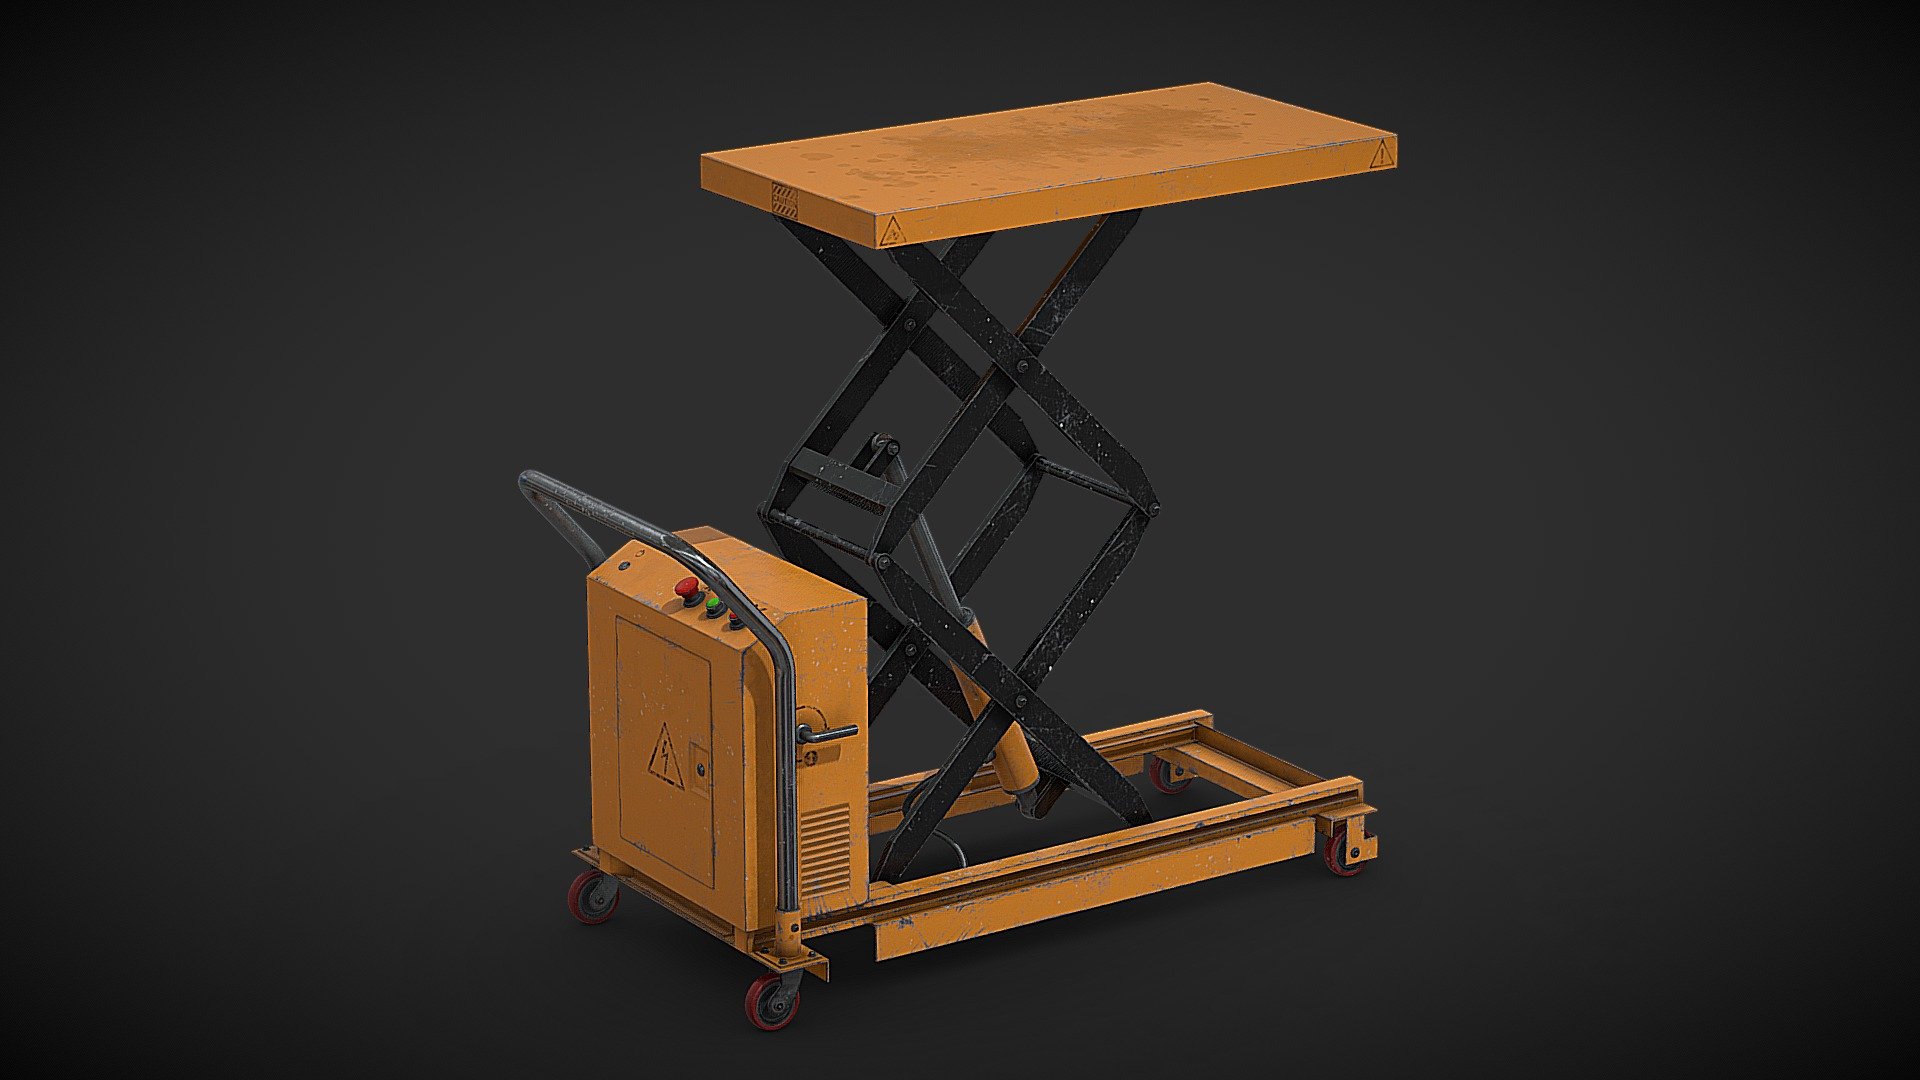 Orange-black electric scissor lift table.

Specification:




Model is in a real scale

Height: 166cm

Polygons: 105749

Verticles: 55255

Only Quads and Triangles used

Non-overlapping UV mapping

Formats:




3ds max 2017 V-Ray (native)

3ds max 2017 Arnold

Cinema R20

Cinema R20 V-Ray

Blender Cycles

Unreal Engine 5.1

Unity 2020

FBX

OBJ

DWG
 - Scissor Lift Table I - Buy Royalty Free 3D model by Fusemesh 3d model